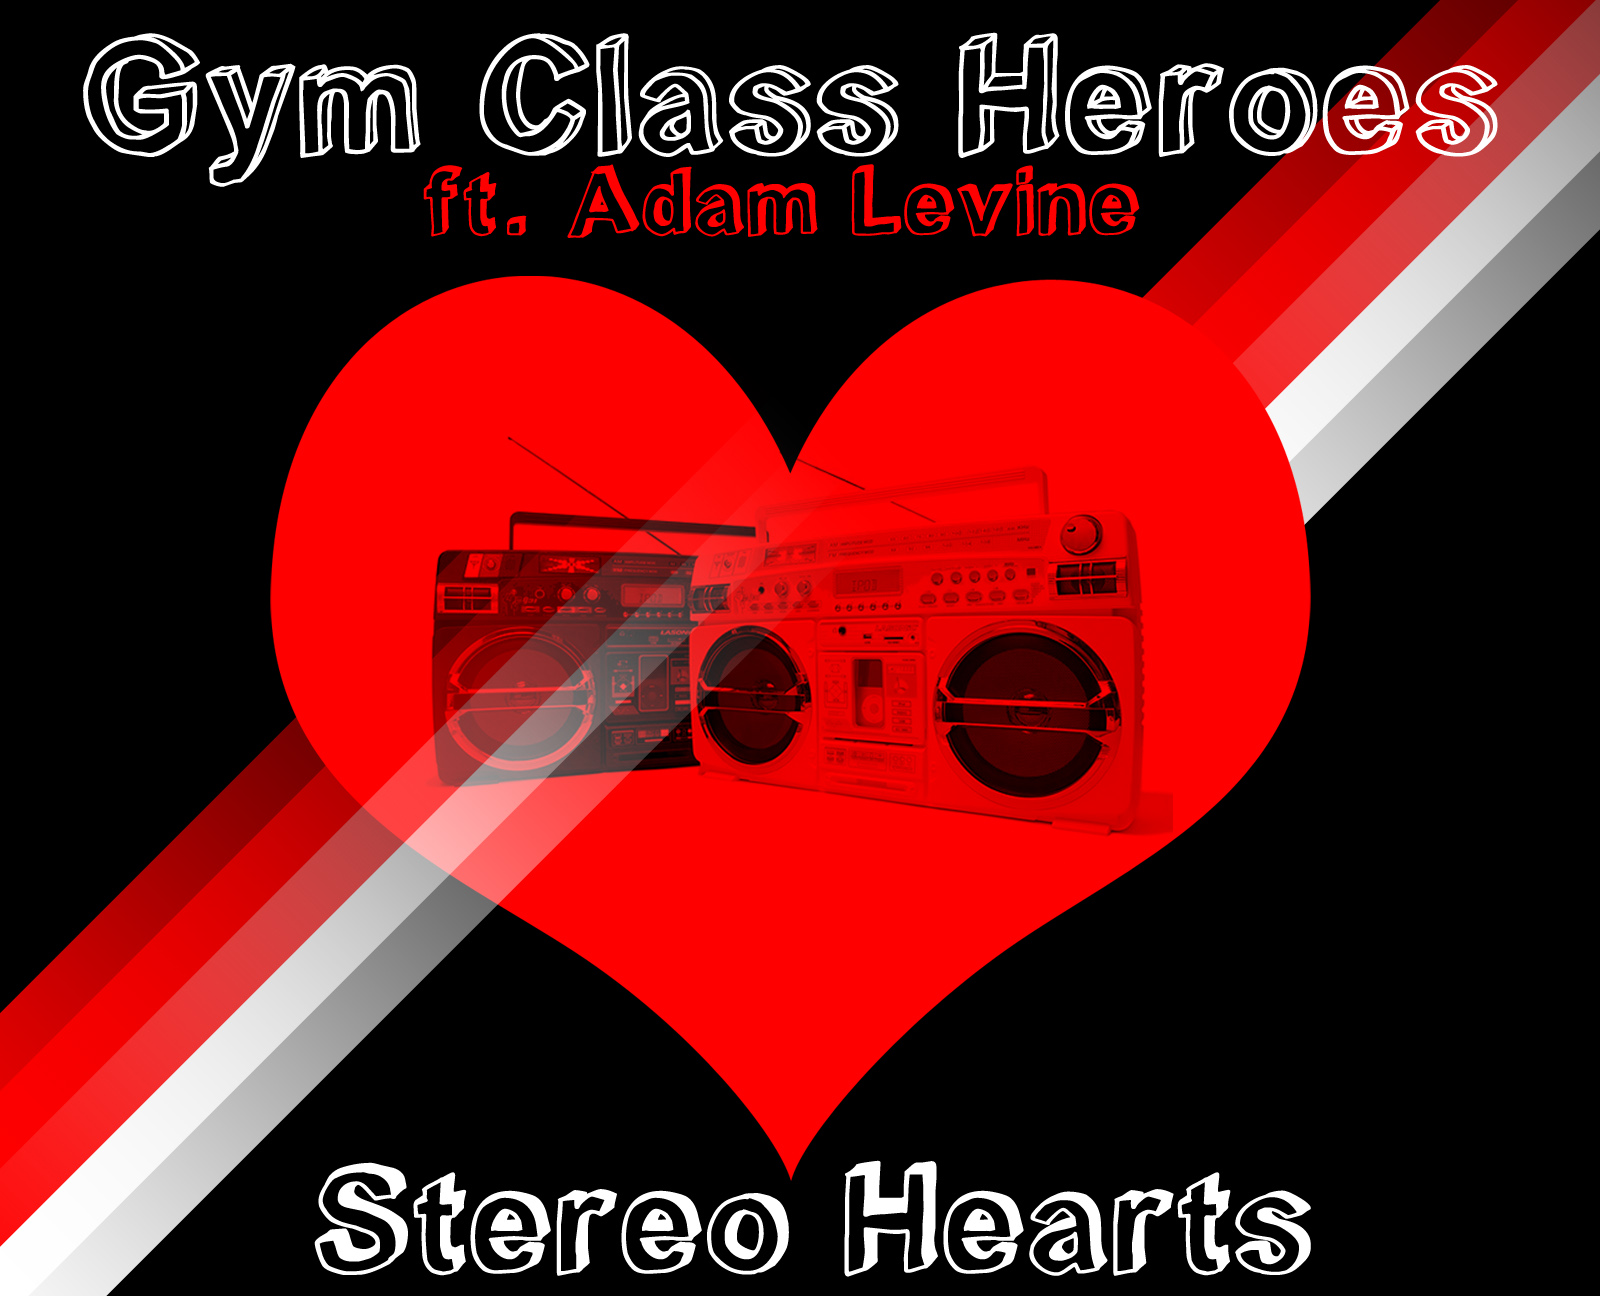 Gym Class Heroes ft. Adam Levine - Stereo Hearts